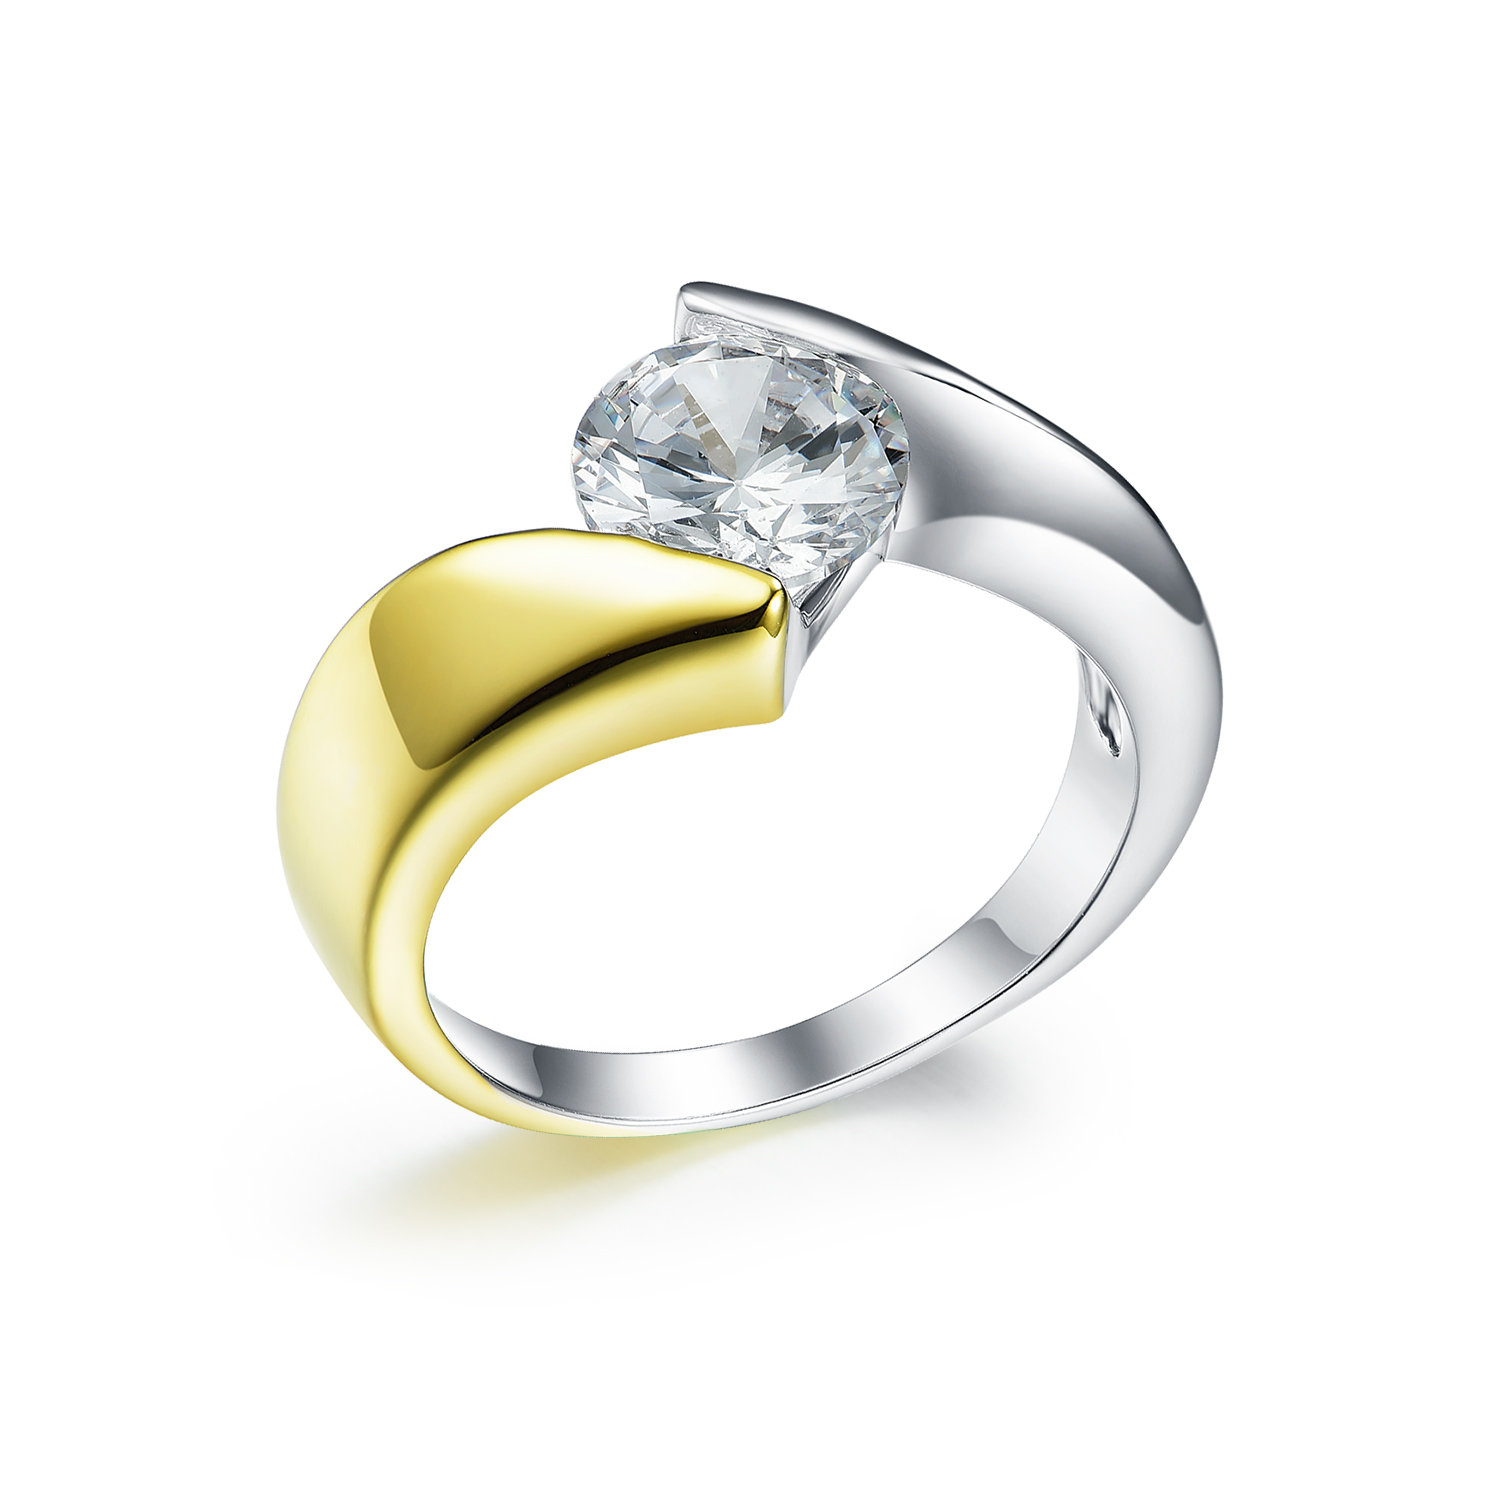 RI2998-Brilliant Engagement Ring bazel a 5A CZ in Sterling Silver under Two-tone Plating